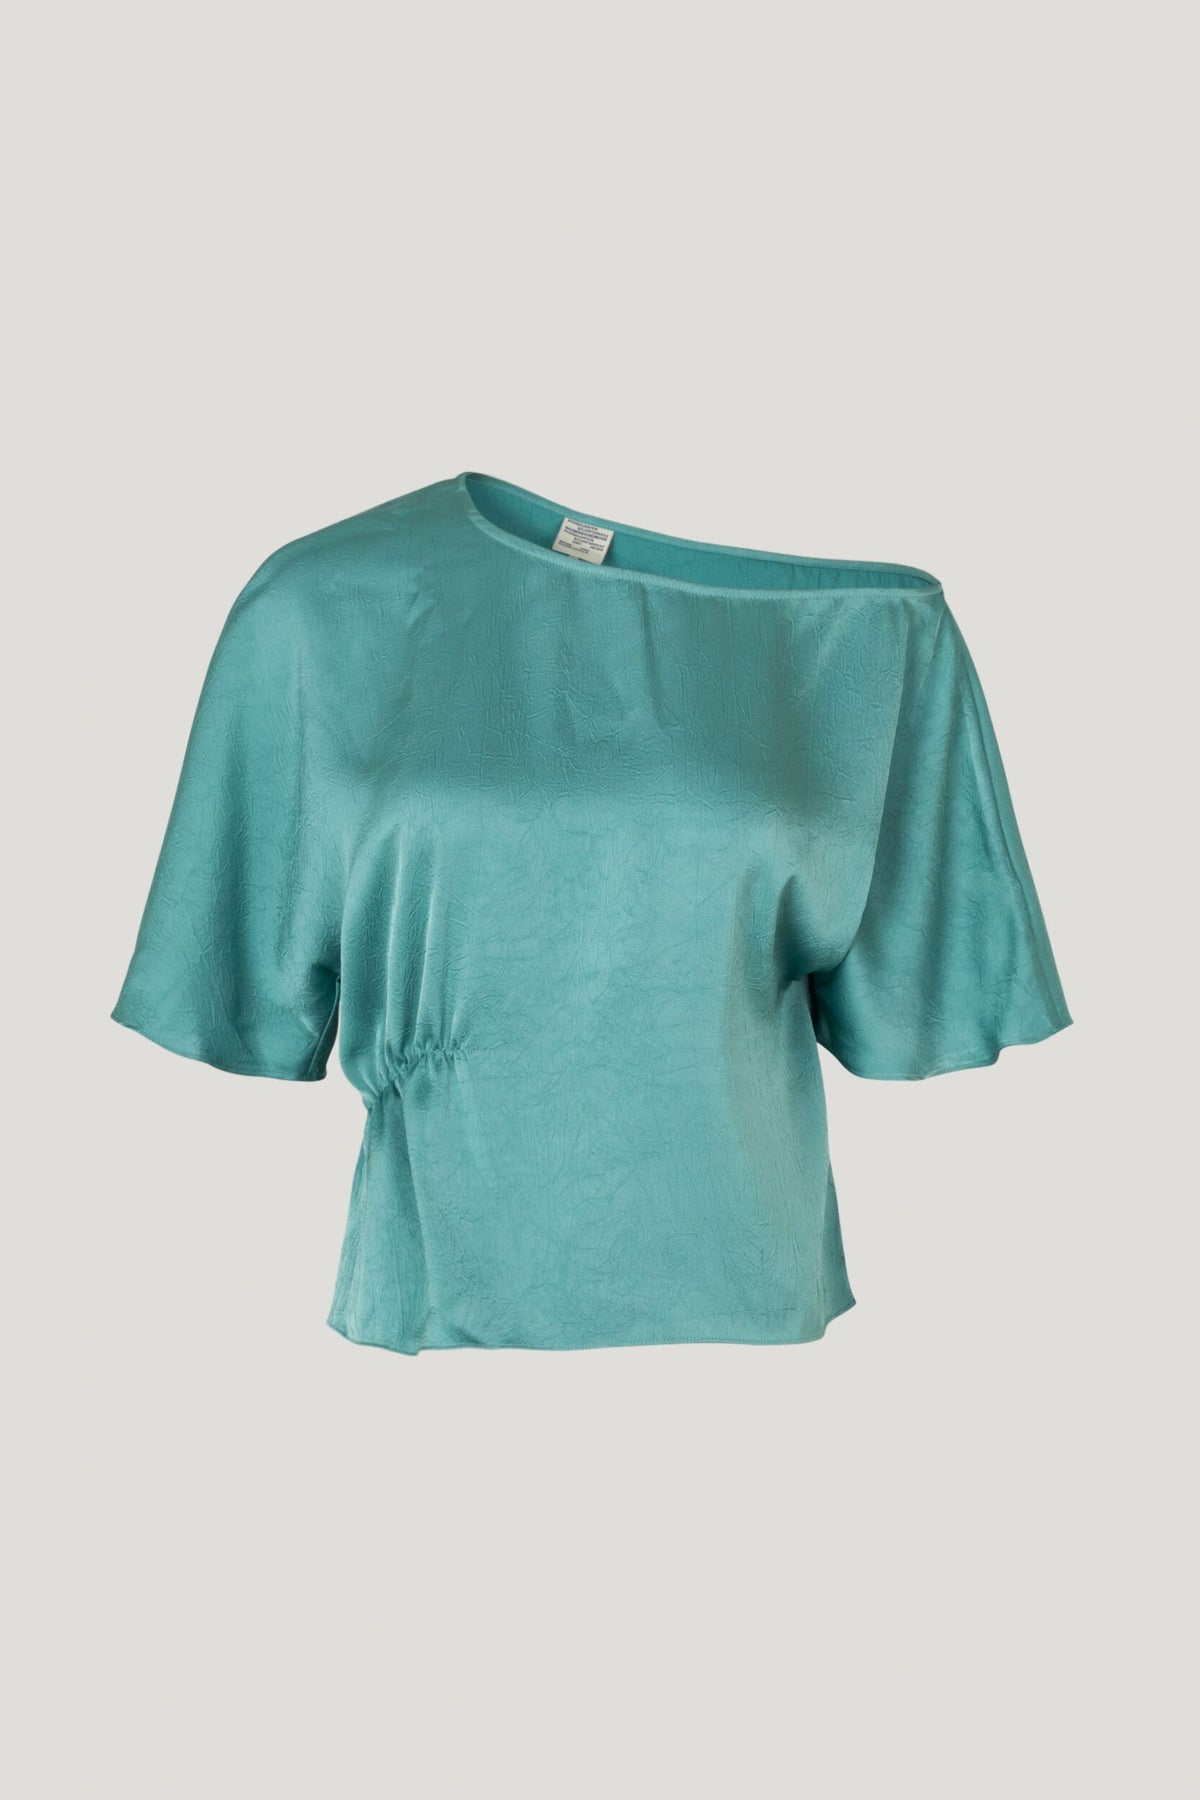 Asymmetrical blue green textured satin short sleeved top with elasticated side detail